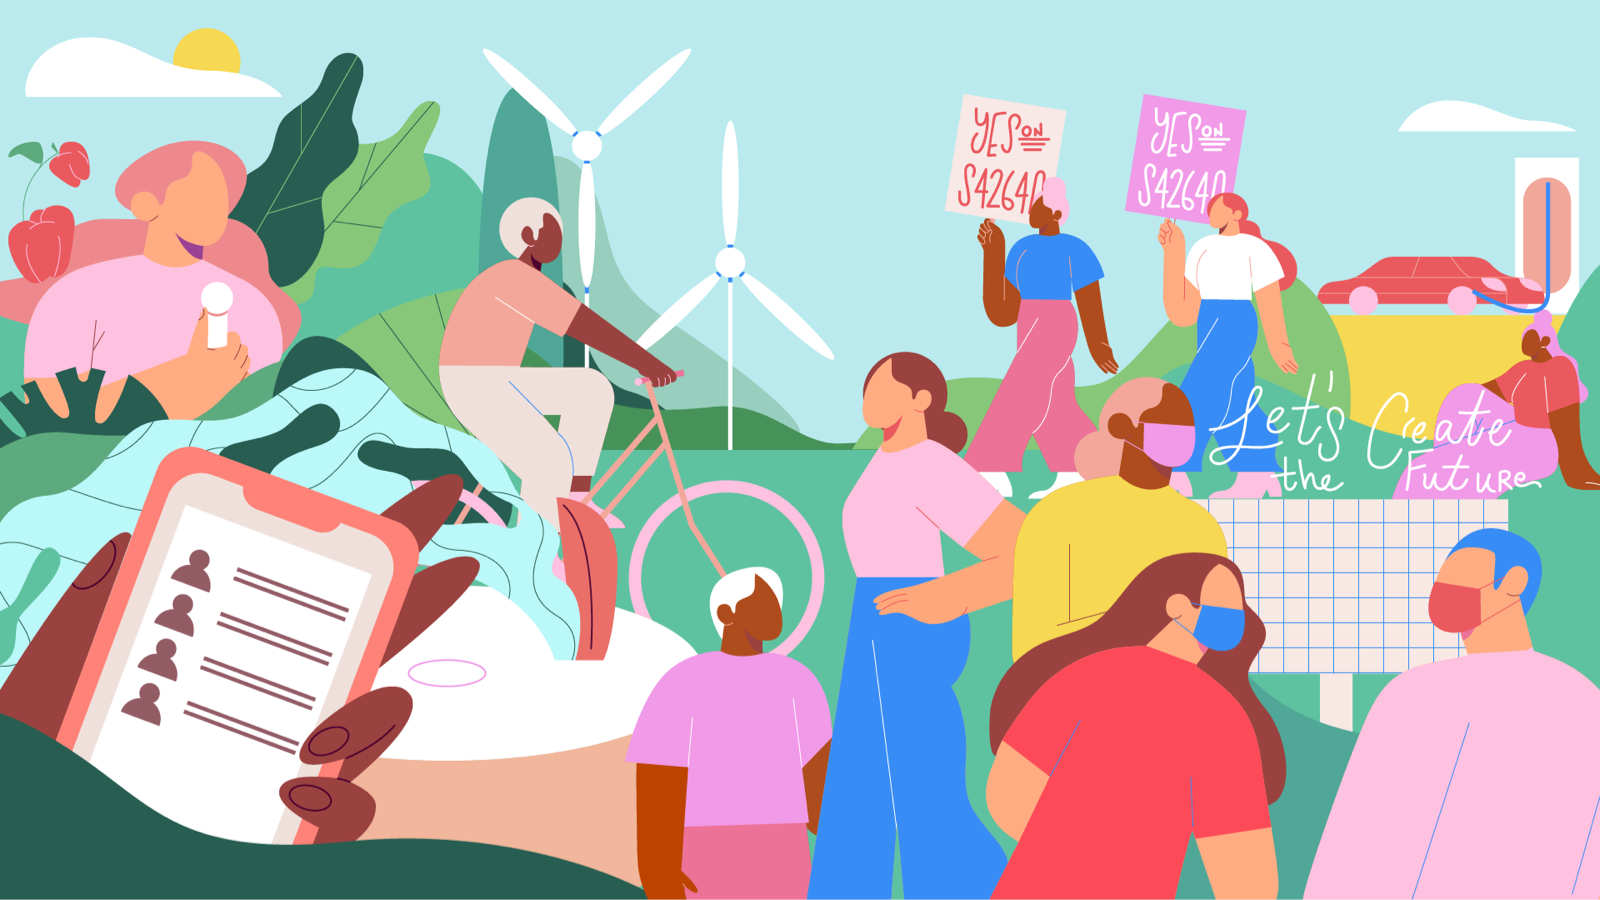 Outdoor scene of diverse people protesting, riding a bike, speaking to a group, sharing on social media, in a community garden, near windmills, and with an electric car.